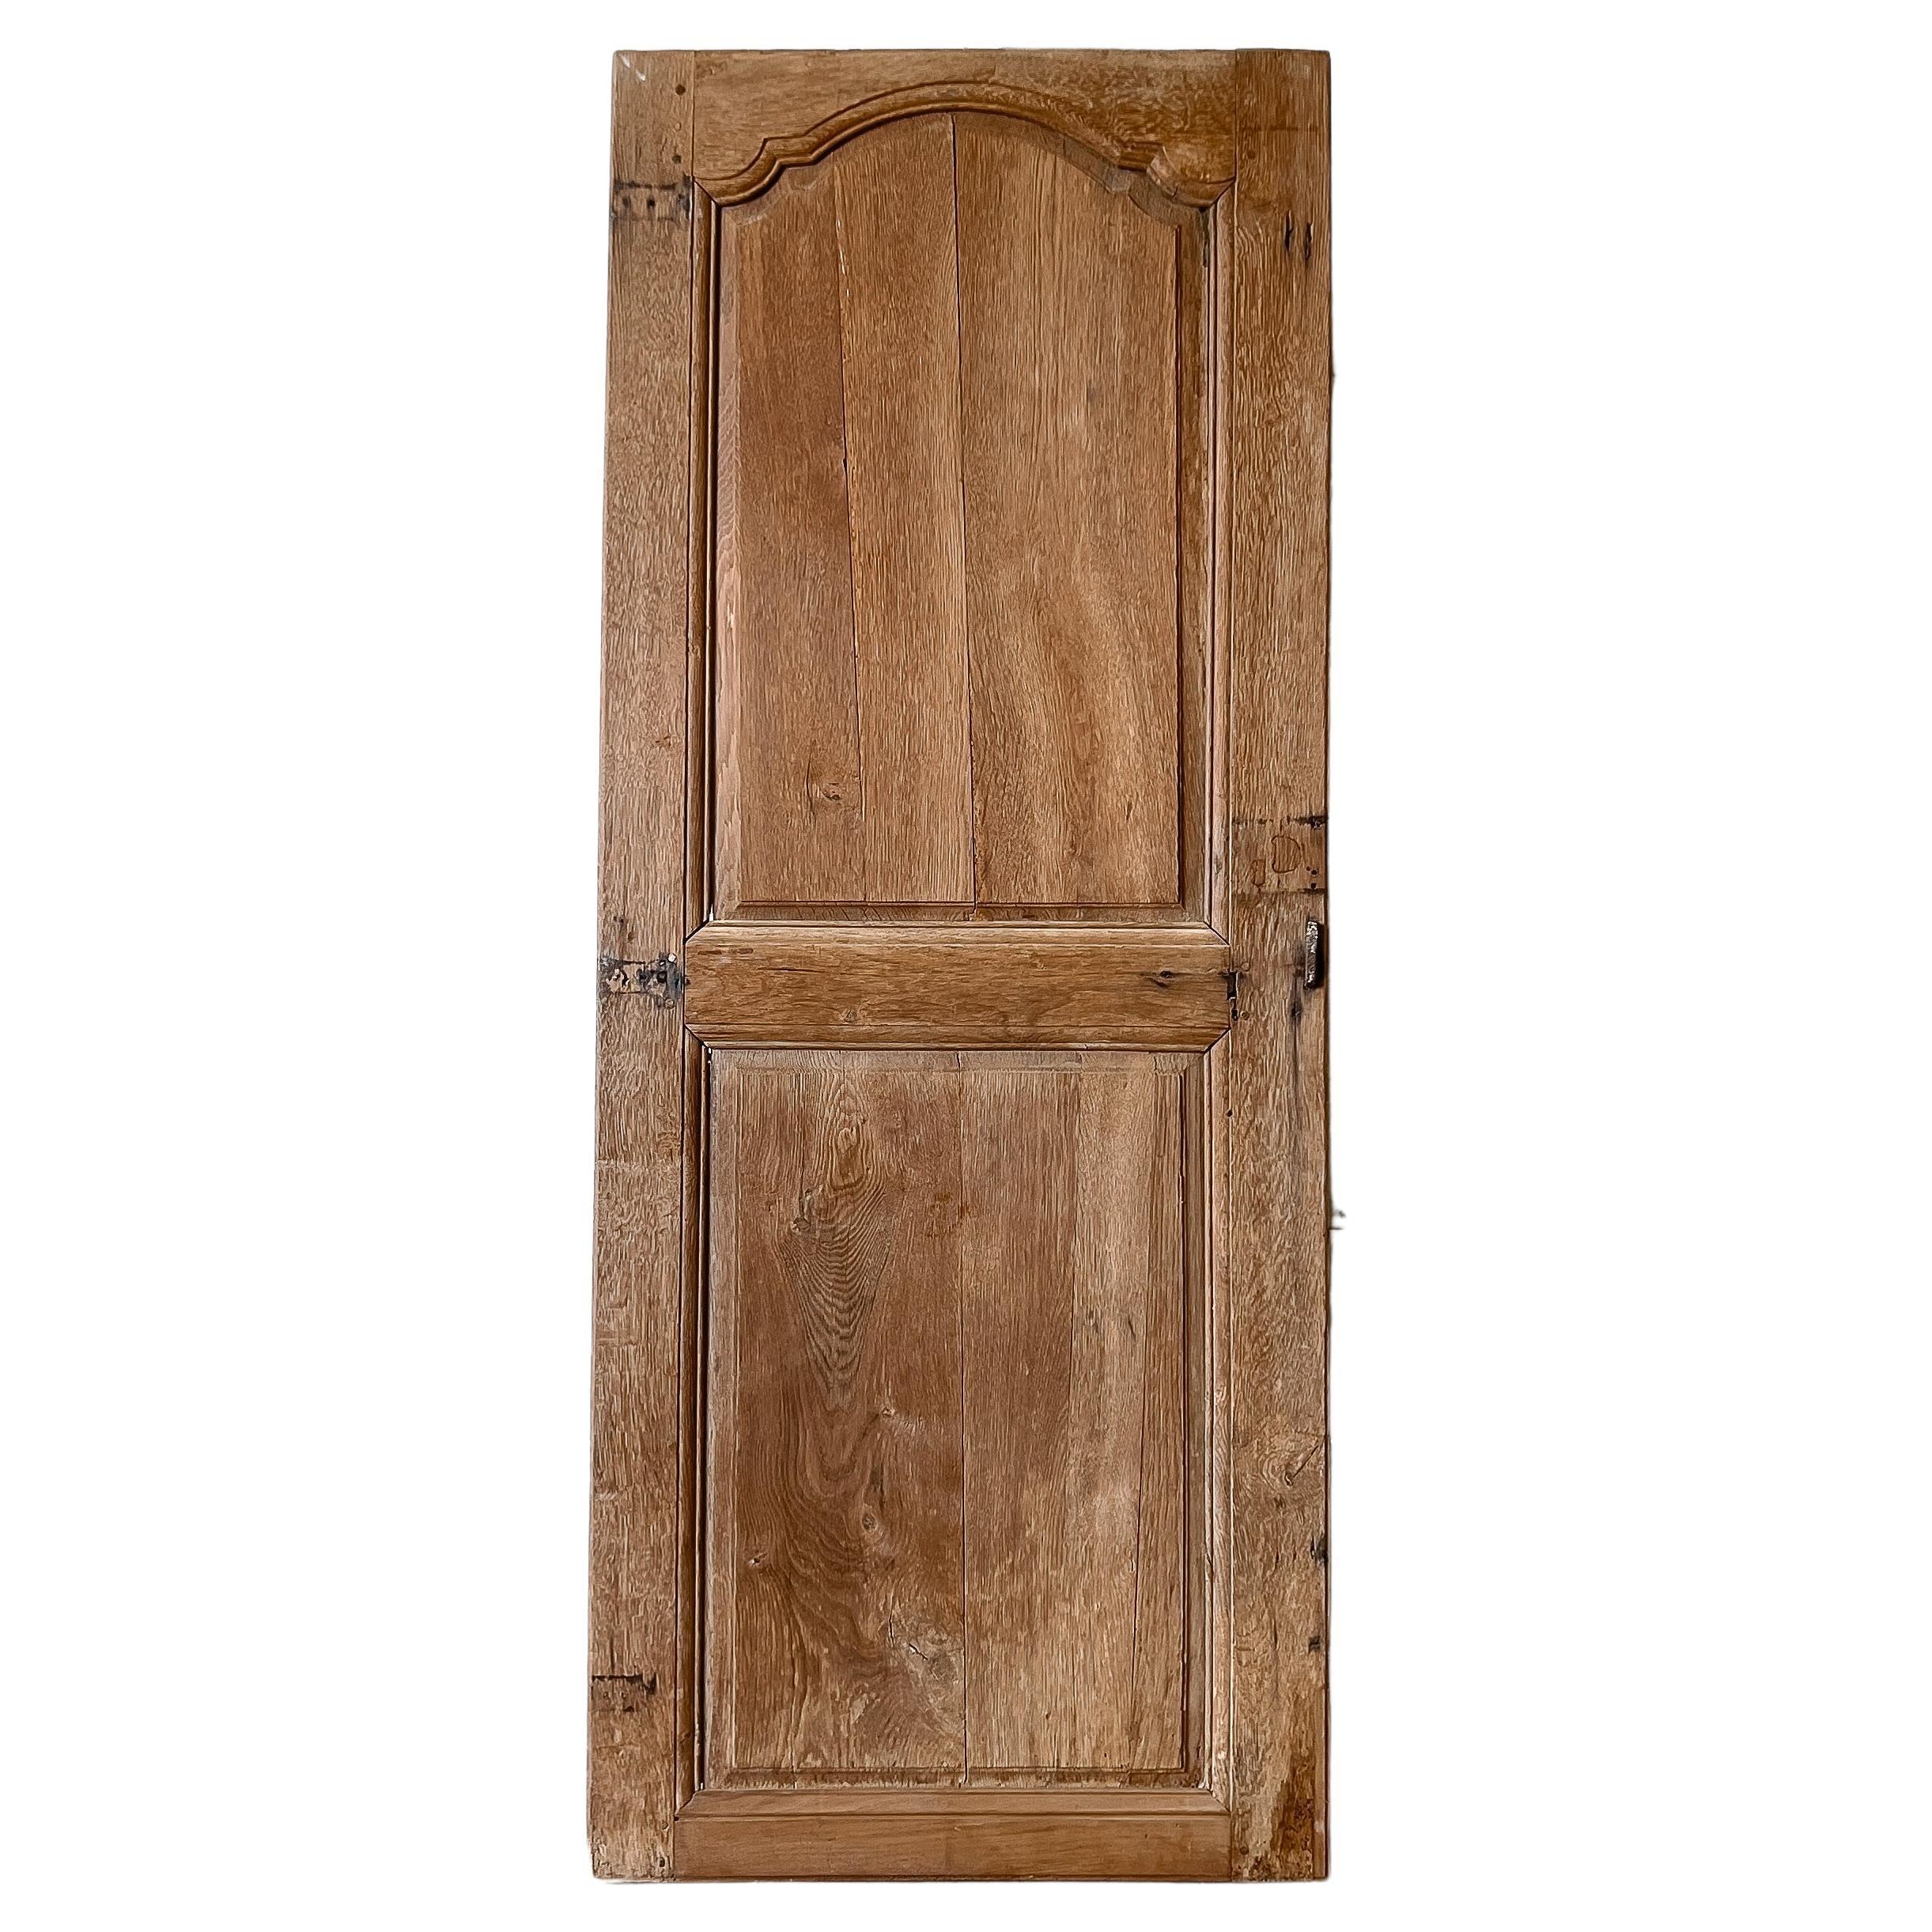 19th Century French Provincial Wardrobe Door For Sale